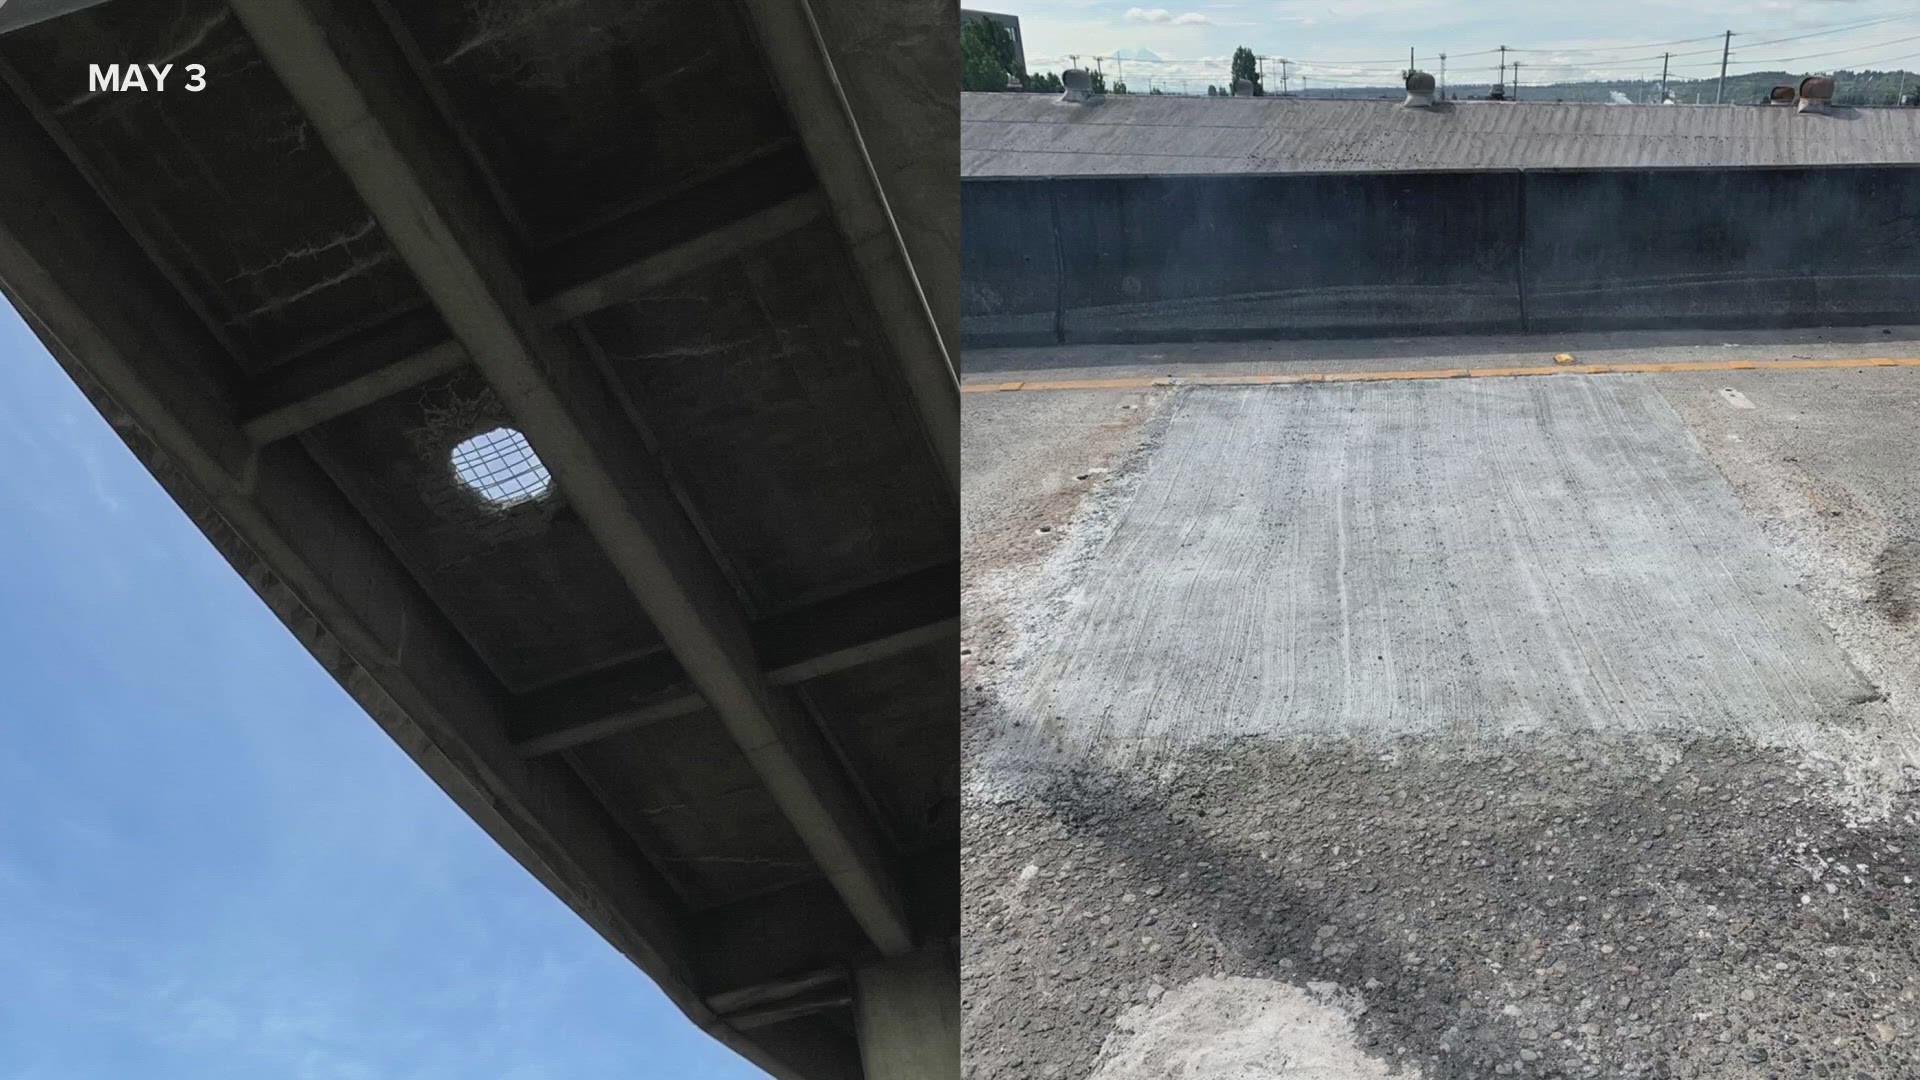 The large hole that appeared on the Hwy 99 ramp of the West Seattle Bridge last week has been repaired and the ramp is now reopened.